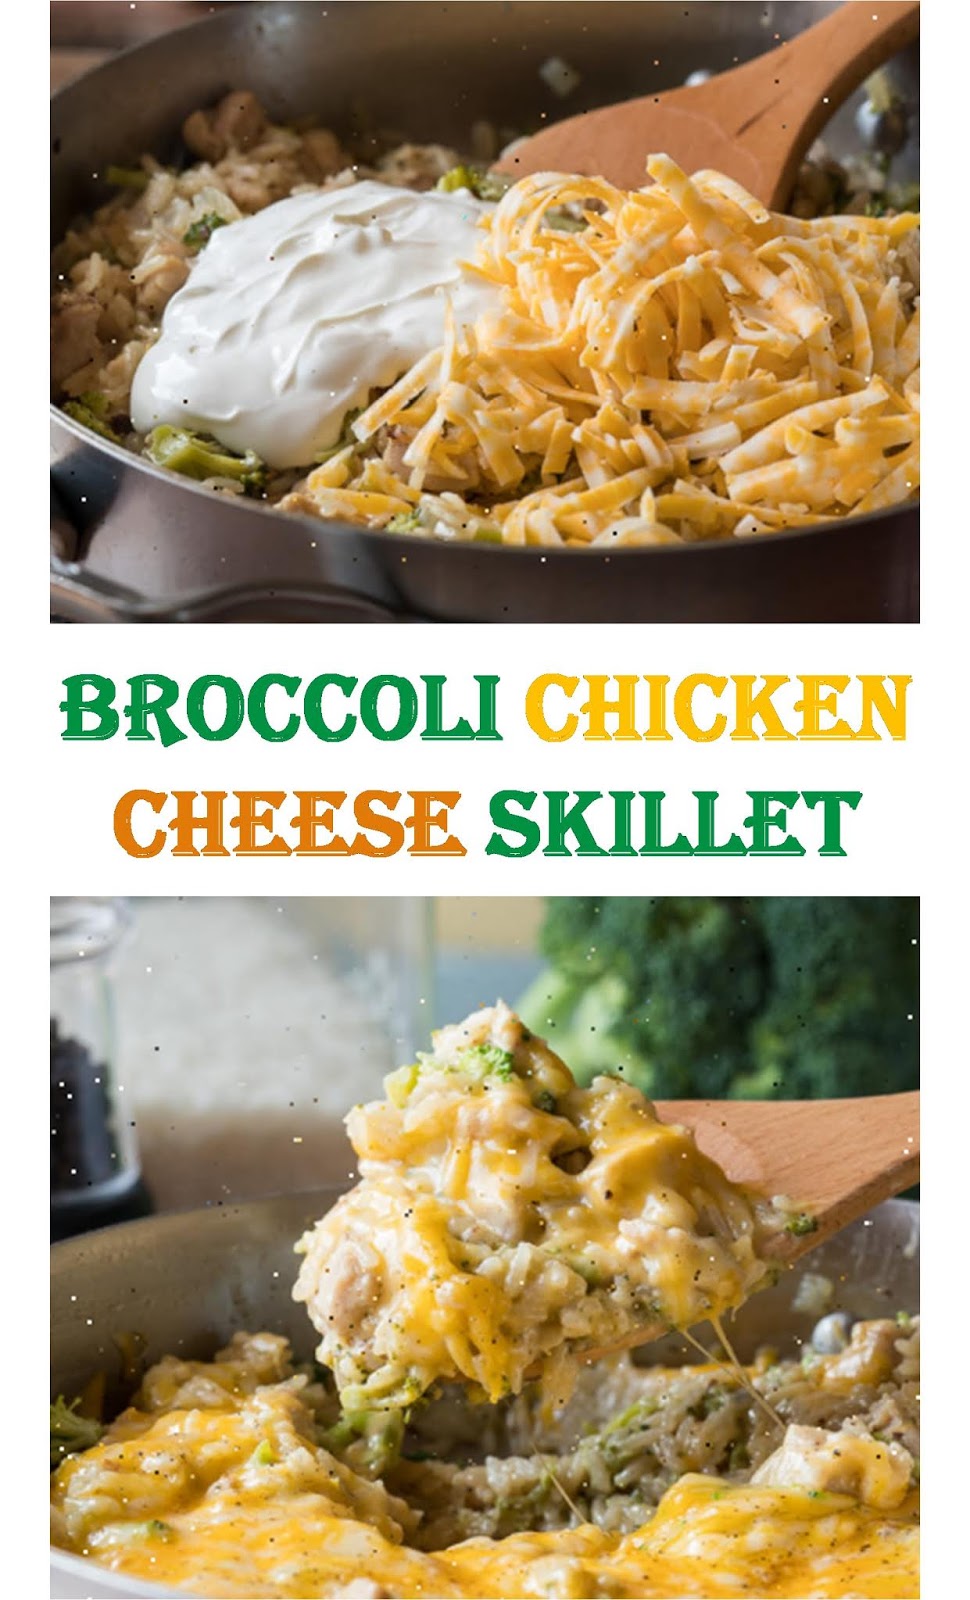 1302 Reviews: My BEST #Recipes >> Broccoli Chicken Cheese #Skillets - .....